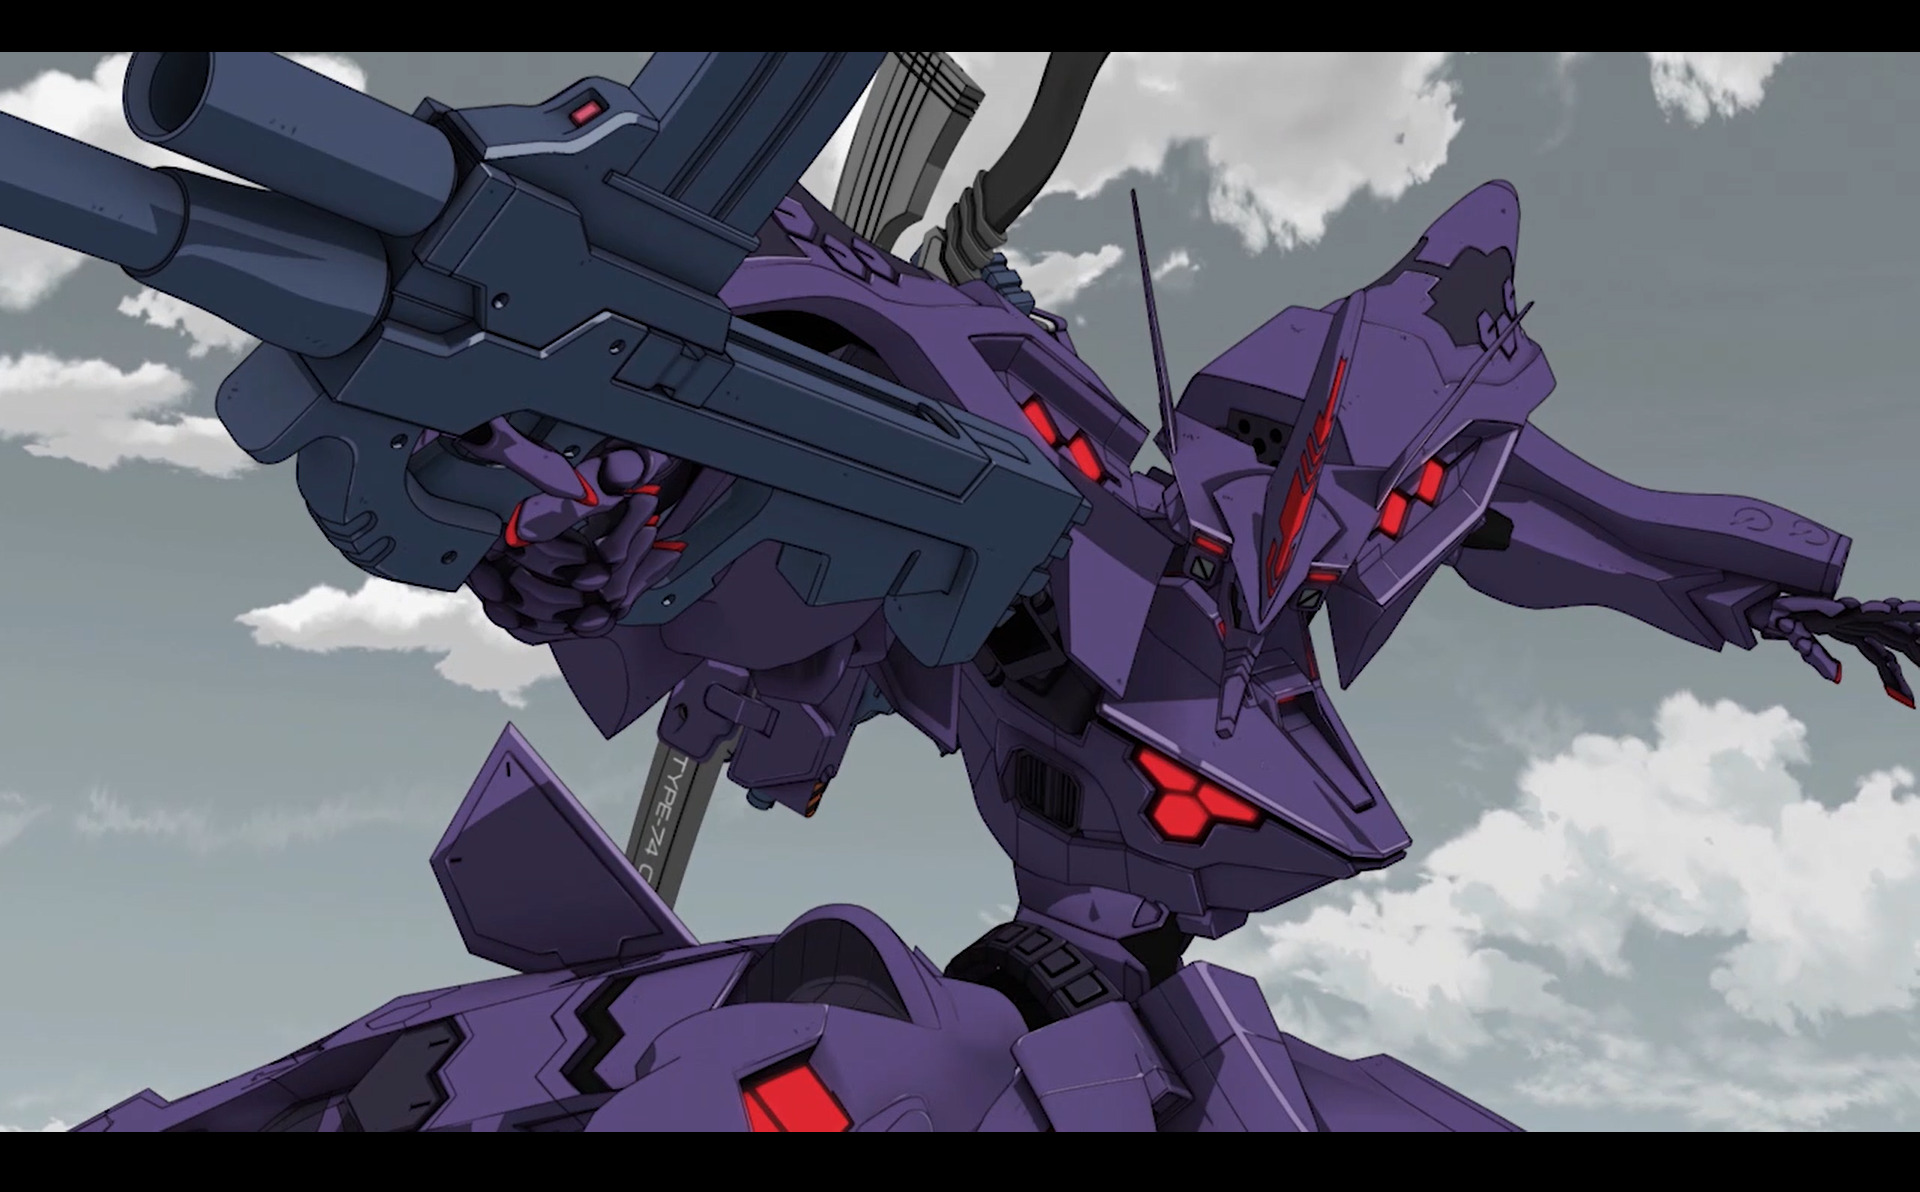 Check out these trailers for our upcoming games, and the Muv-Luv Alternative anime!